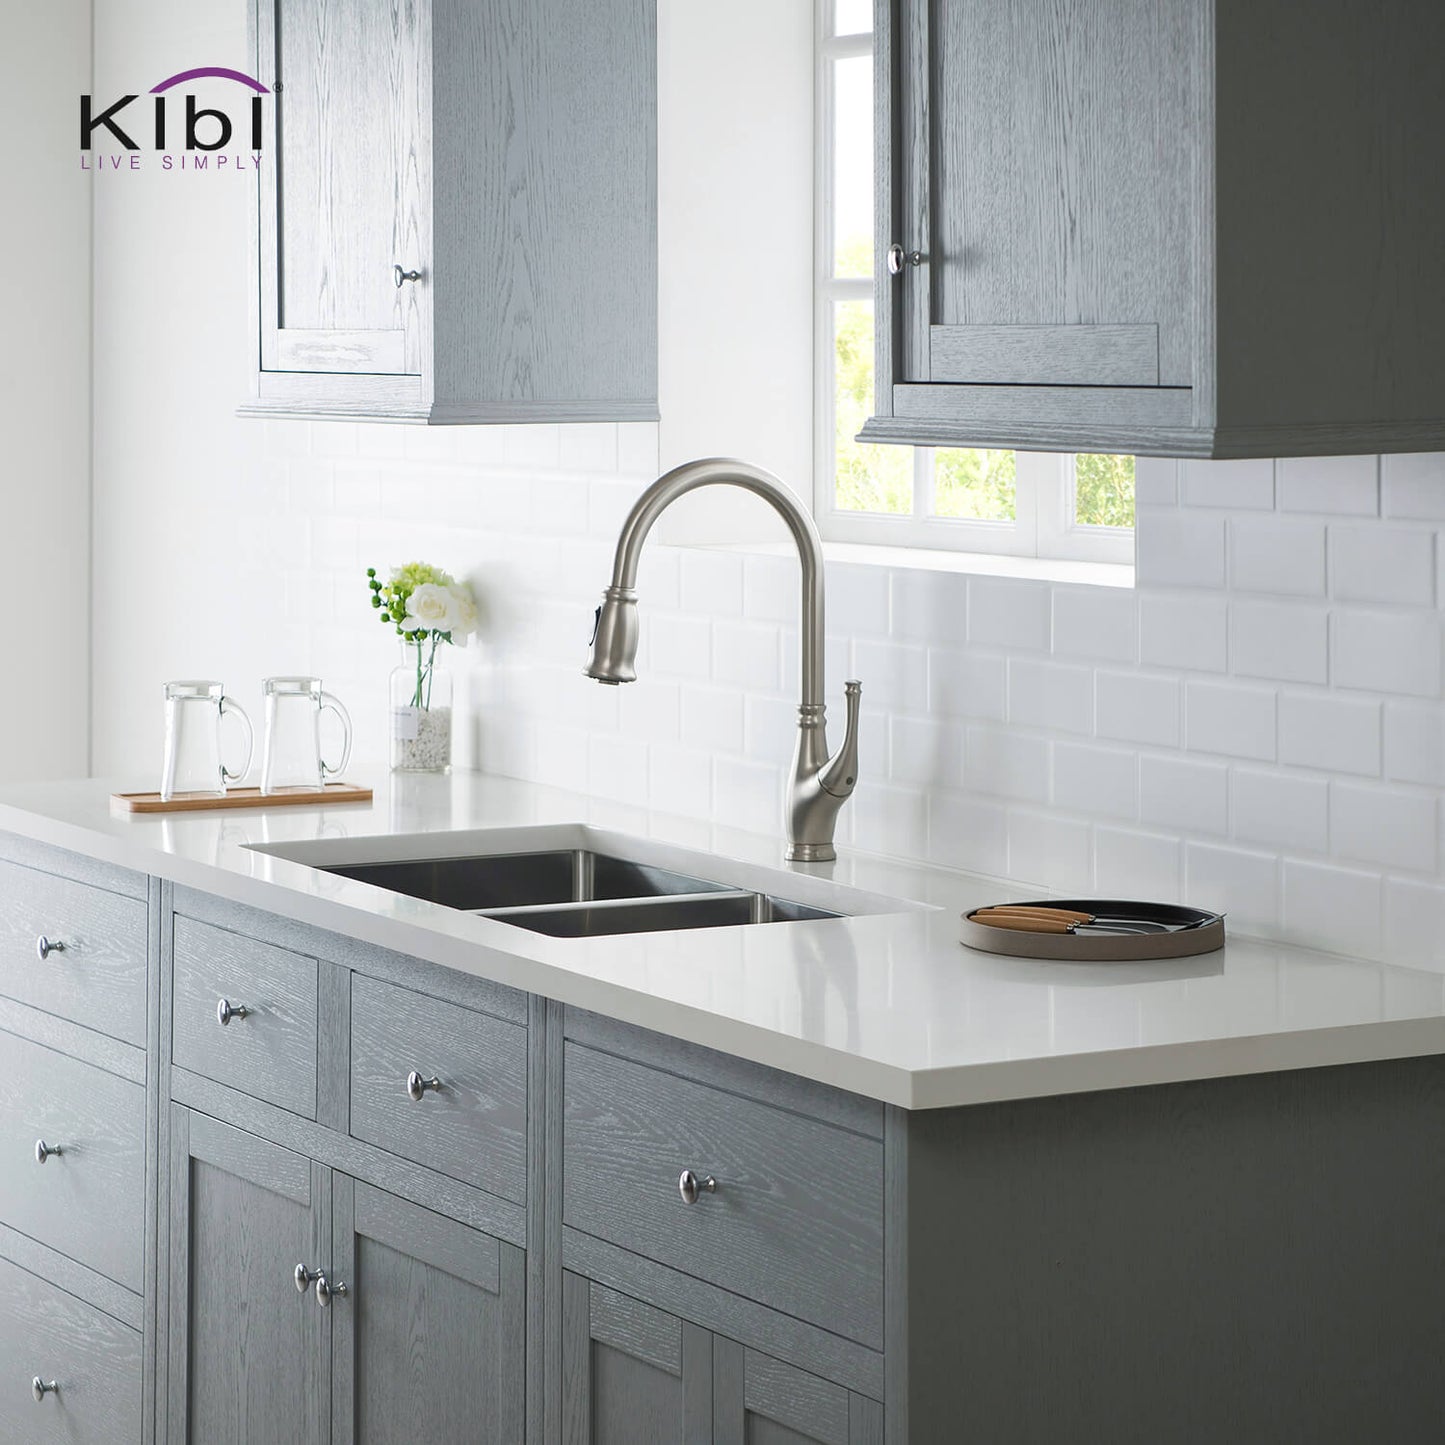 Kibi Summit Single Handle High Arc Pull Down Kitchen Faucet in Brushed Nickel Finish